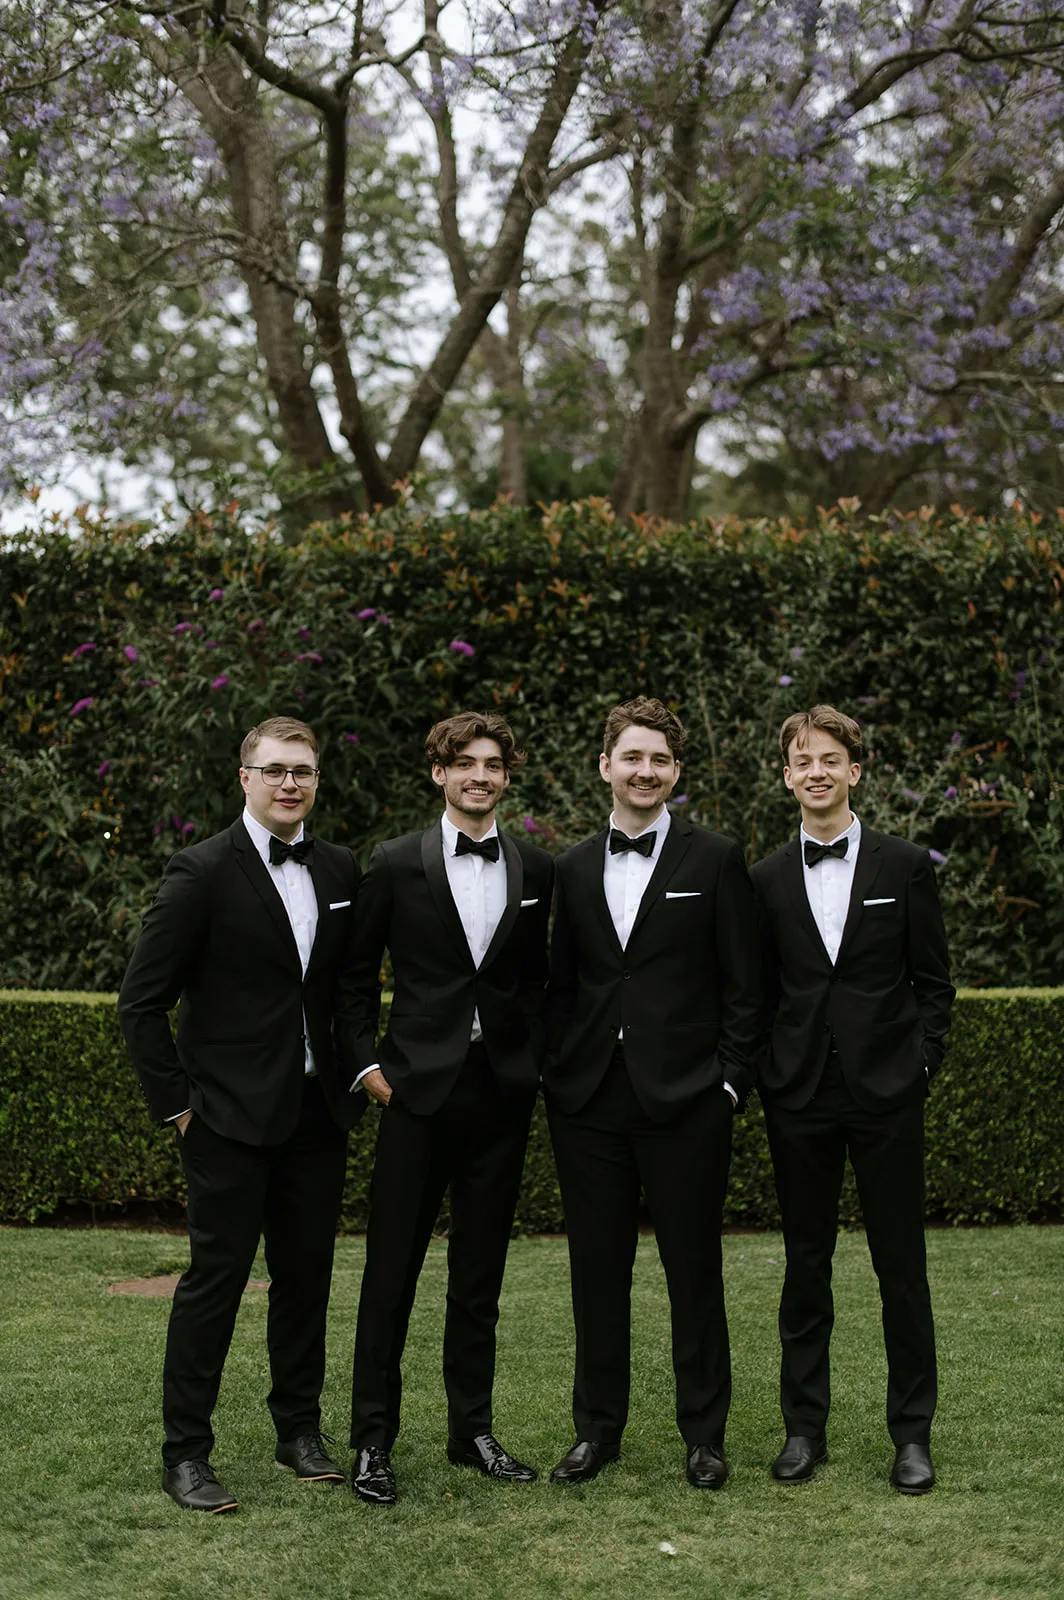 Four men dressed in black tuxedos stand on a lawn with lush greenery and purple flowering trees in the background. They are smiling and standing close to each other, with hands in their pockets or at their sides.